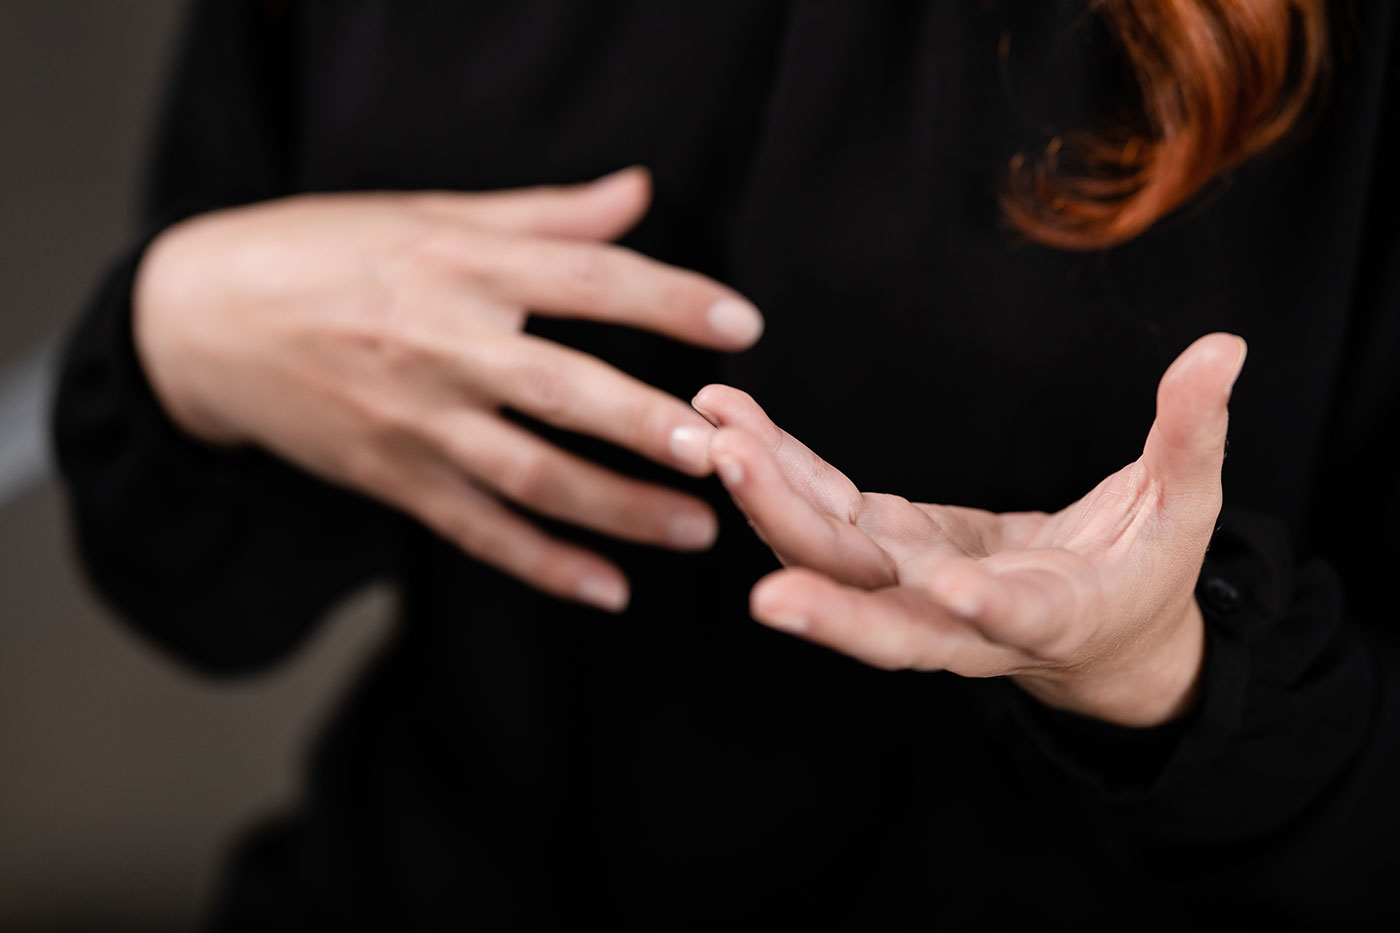 Close-up photograph of a white woman's expressive hands